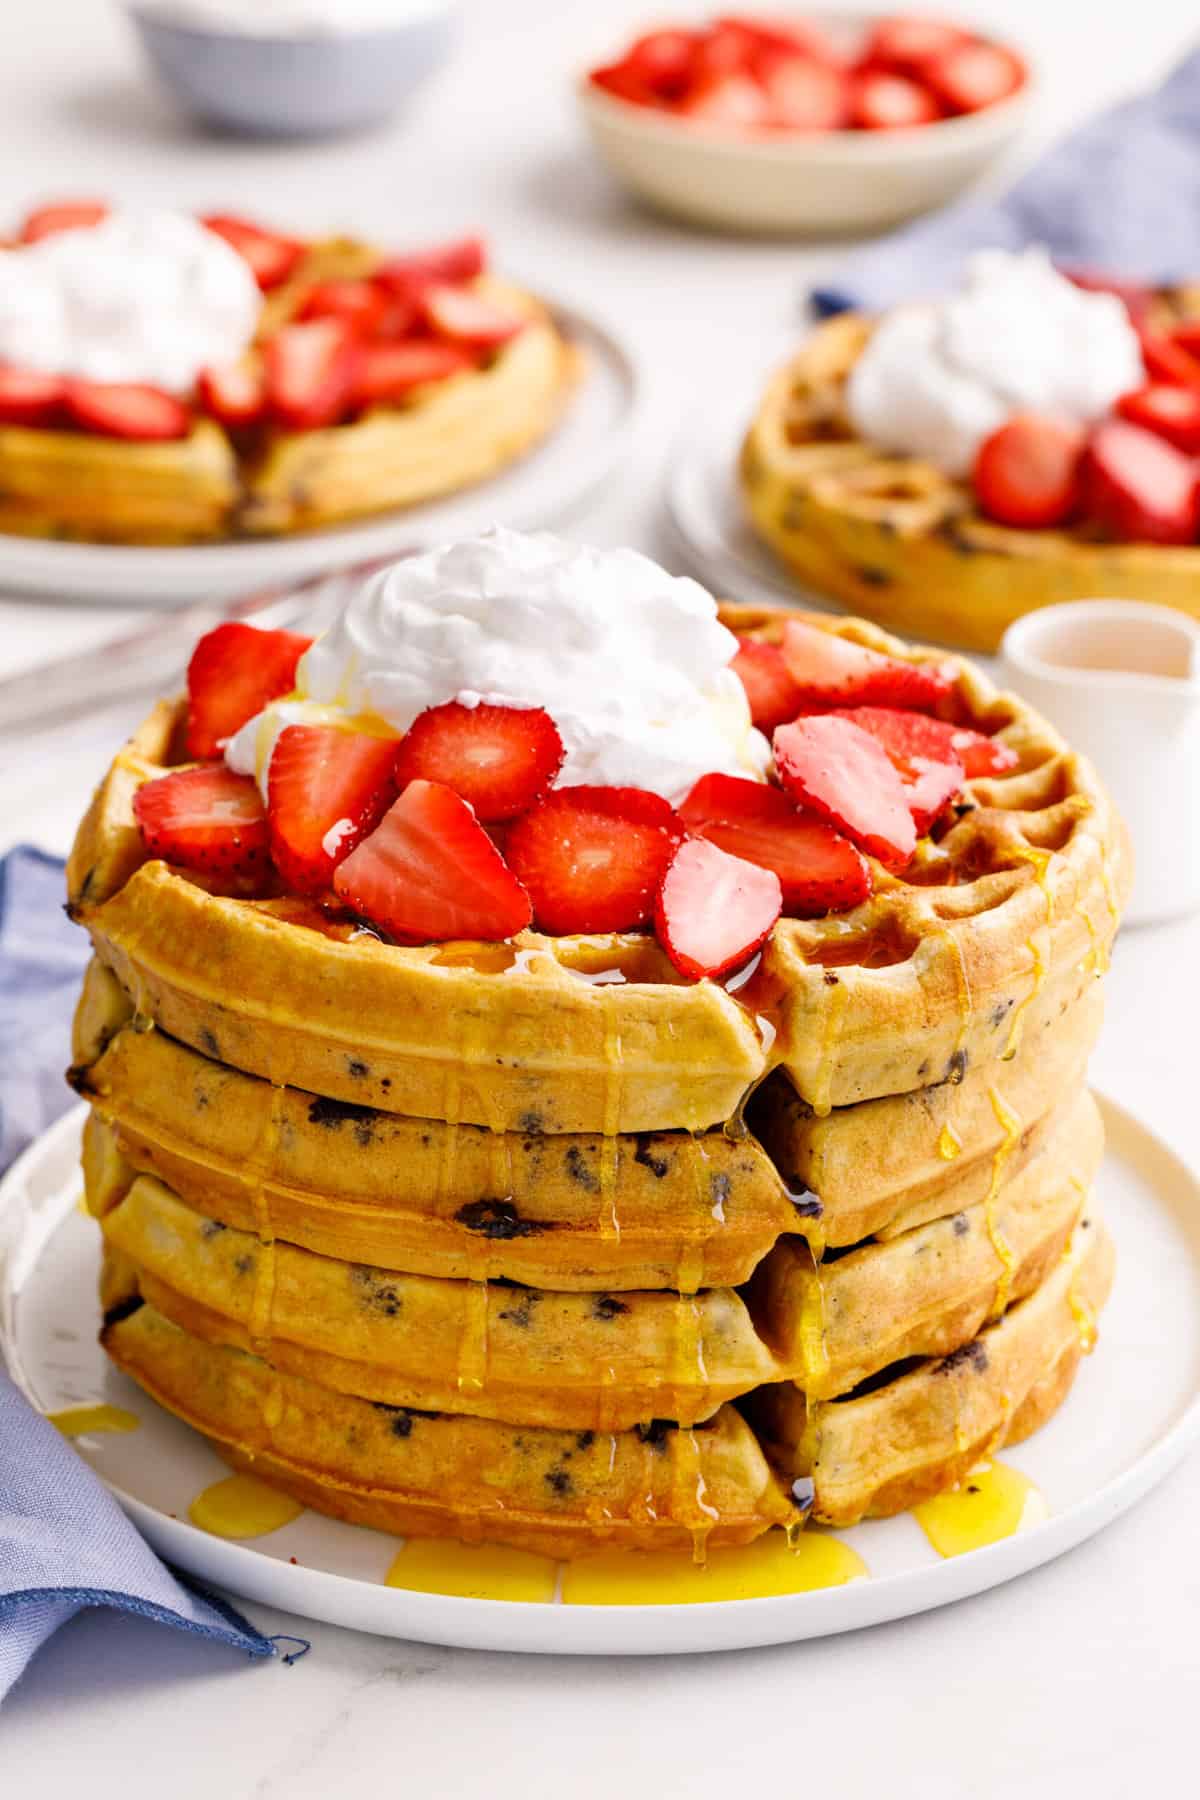 stack of four chocolate chip waffles topped with syrup, fresh strawberries, and whipped cream served on a white round plate